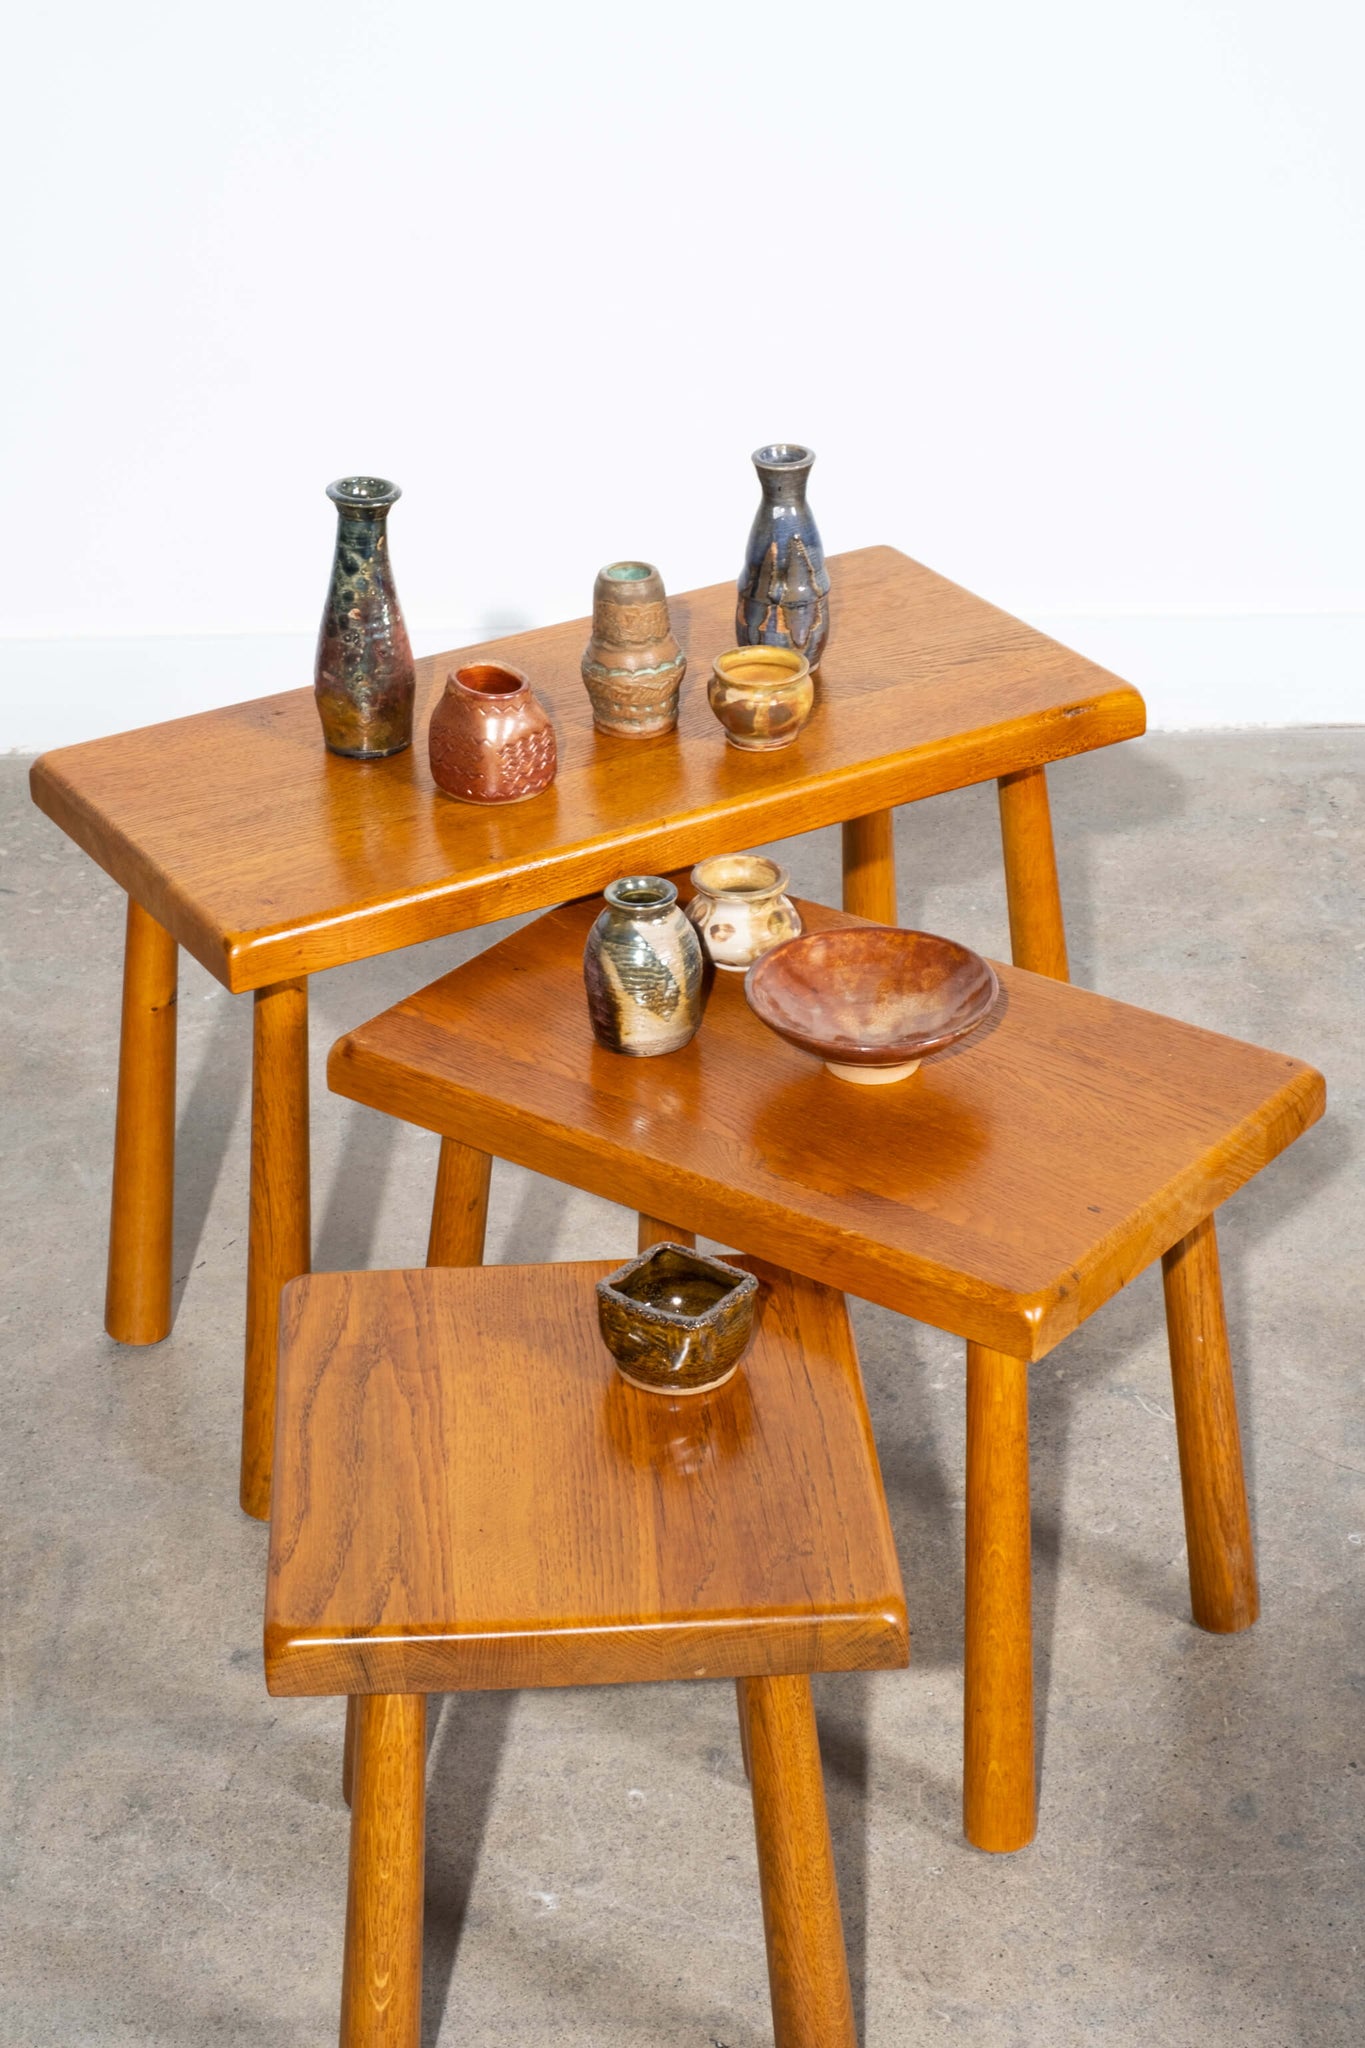 Vintage Oak Nesting Tables with Tapered Legs Set of 3, shown with mini decorative vessels